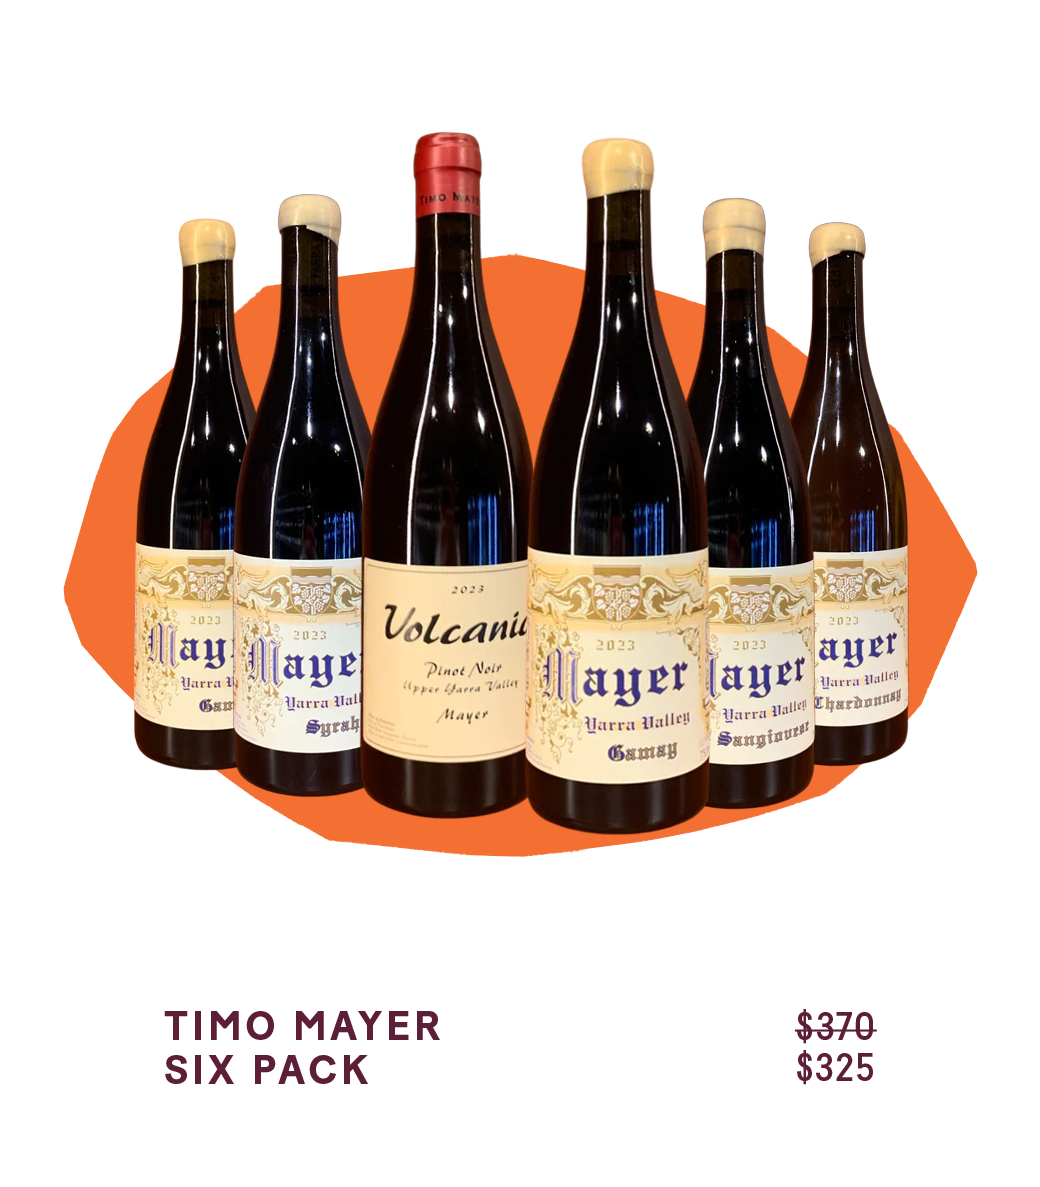 Timo Mayer exceptional 2023 release.